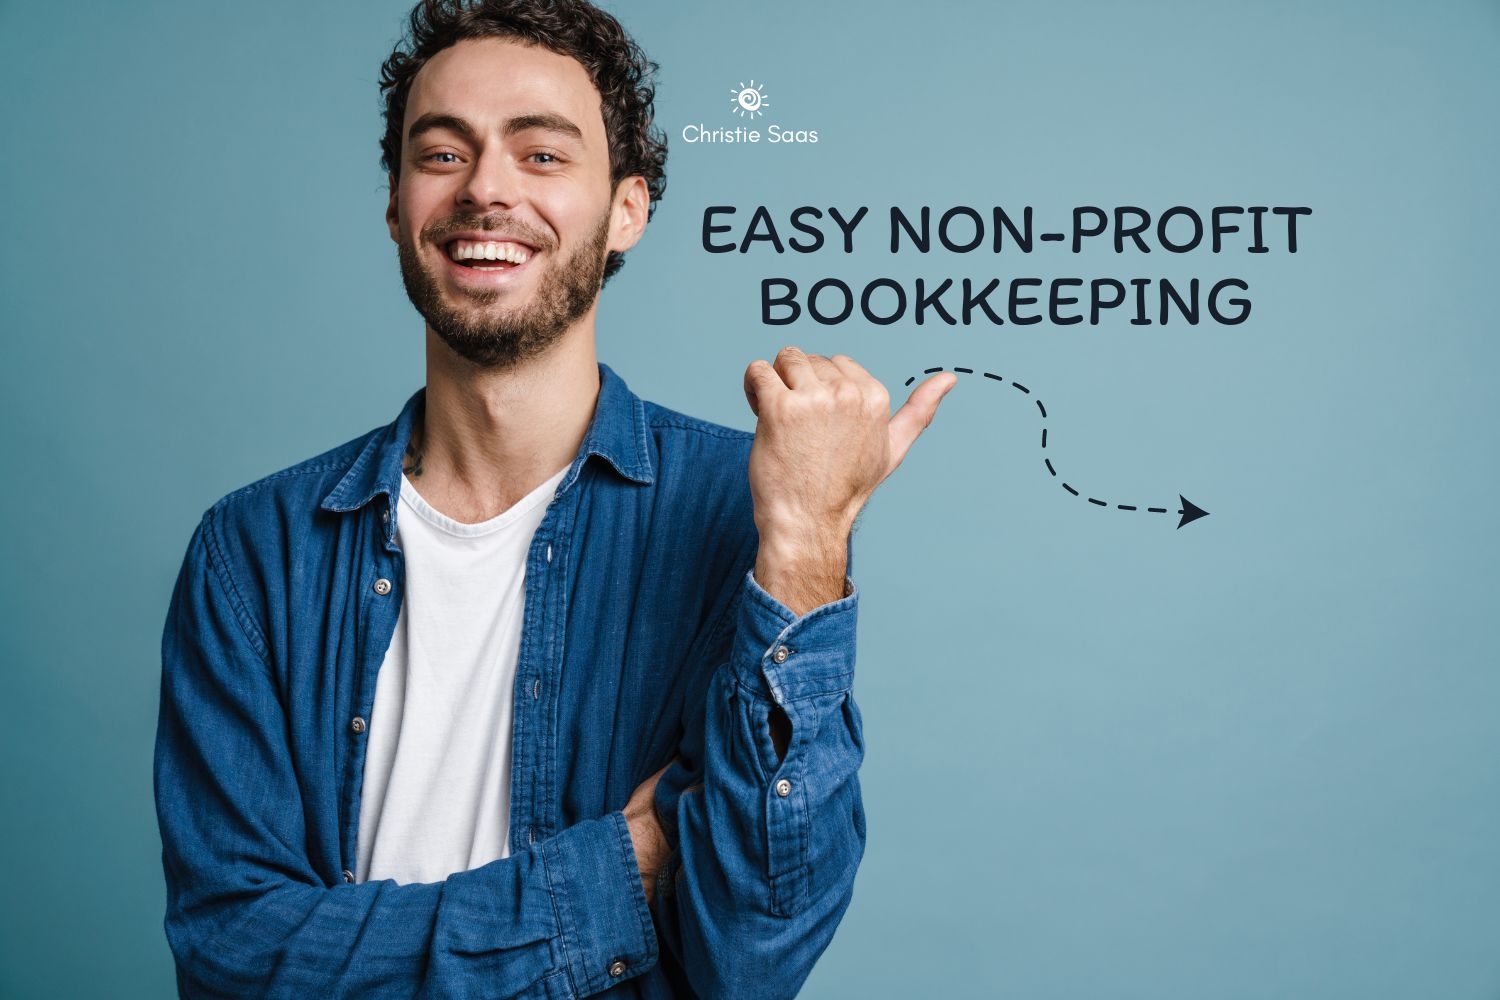 Easy Non-Profit Bookkeeping